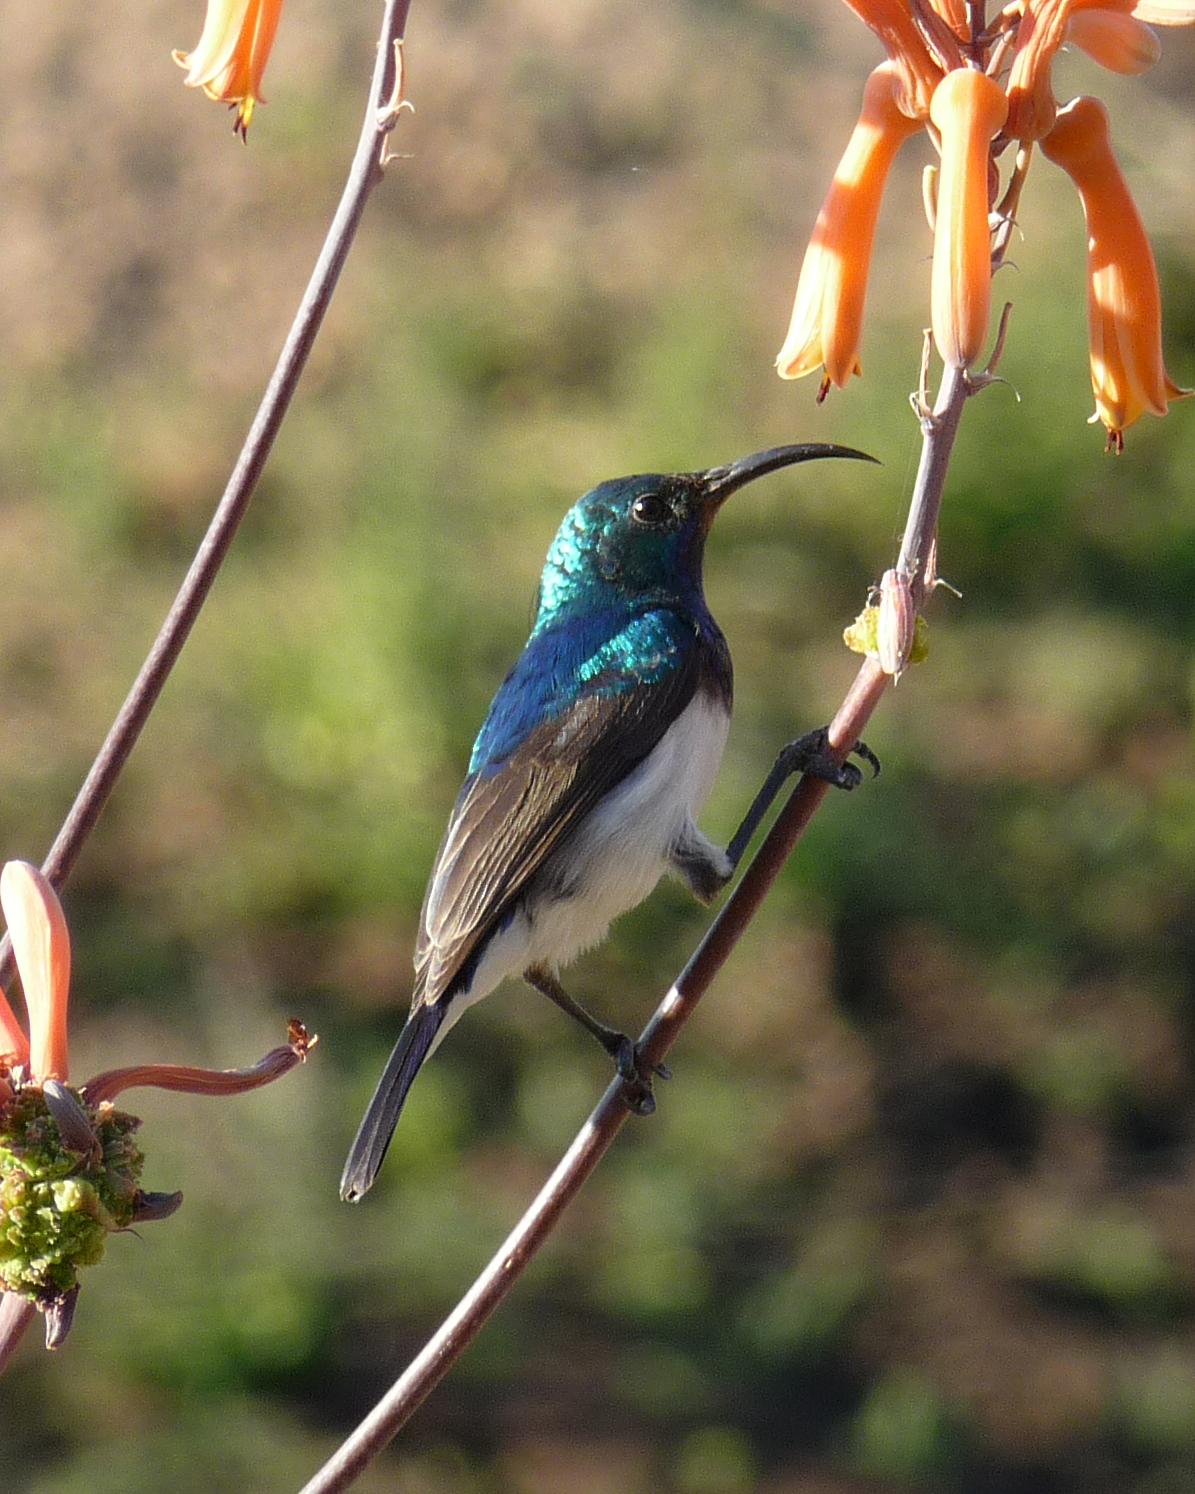 White-breasted Sunbird Photo by Henk Baptist